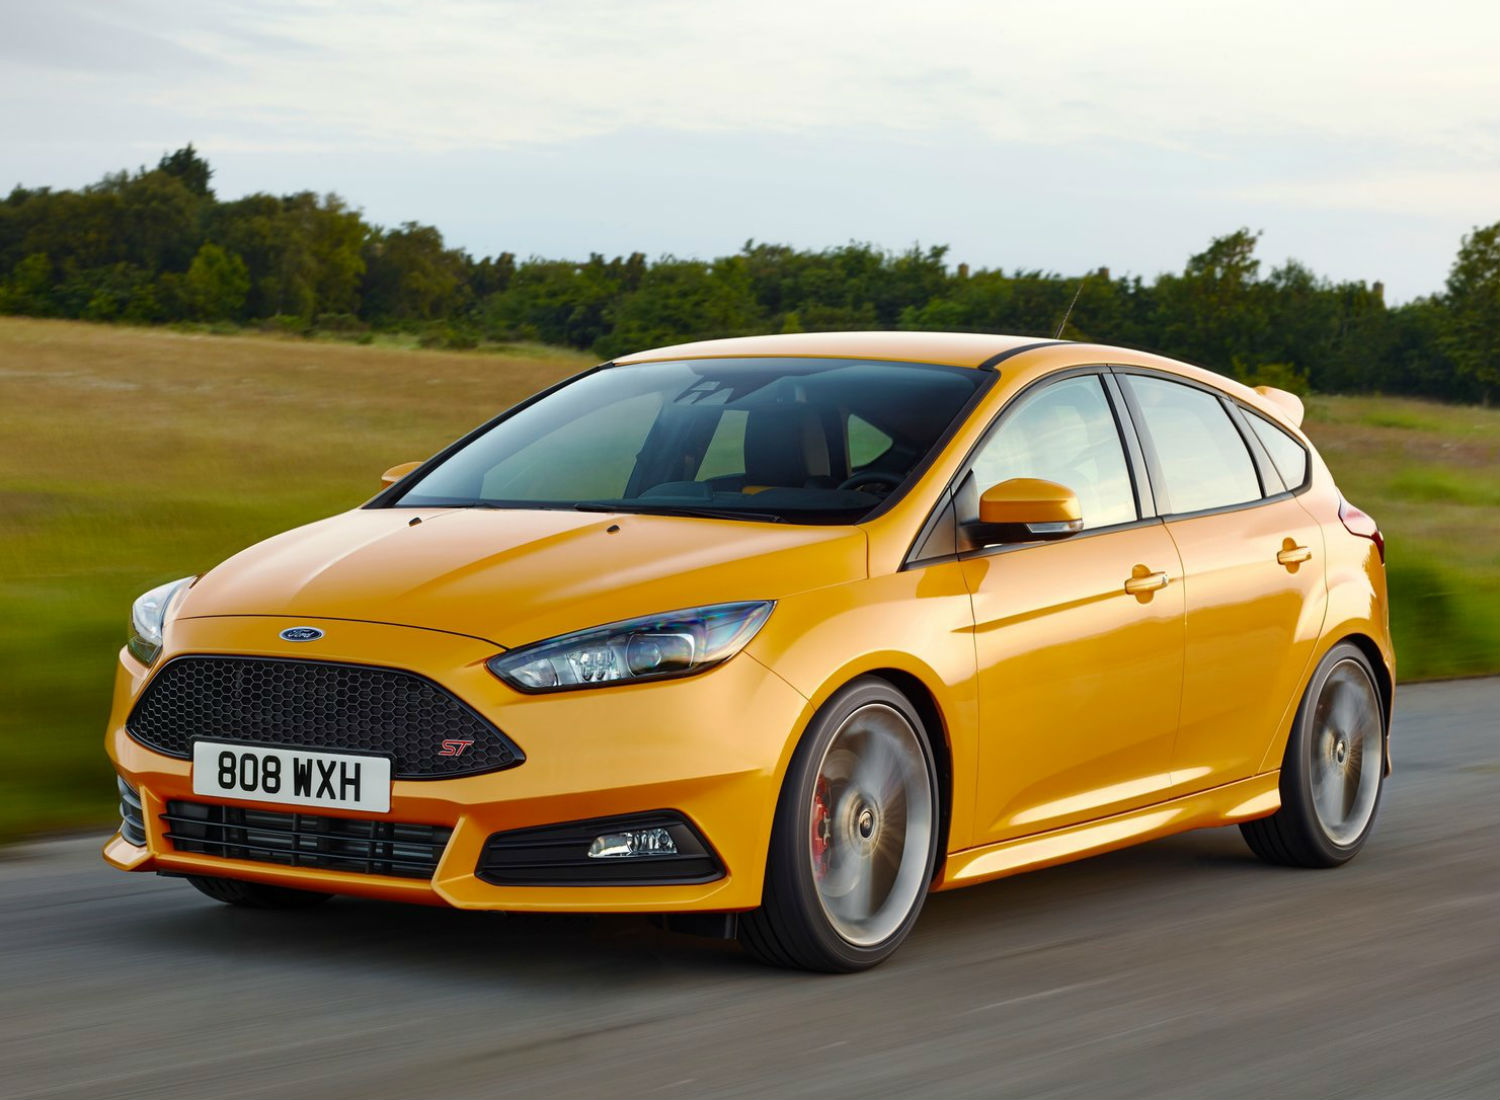 Coches deportivos baratos: Ford Focus ST